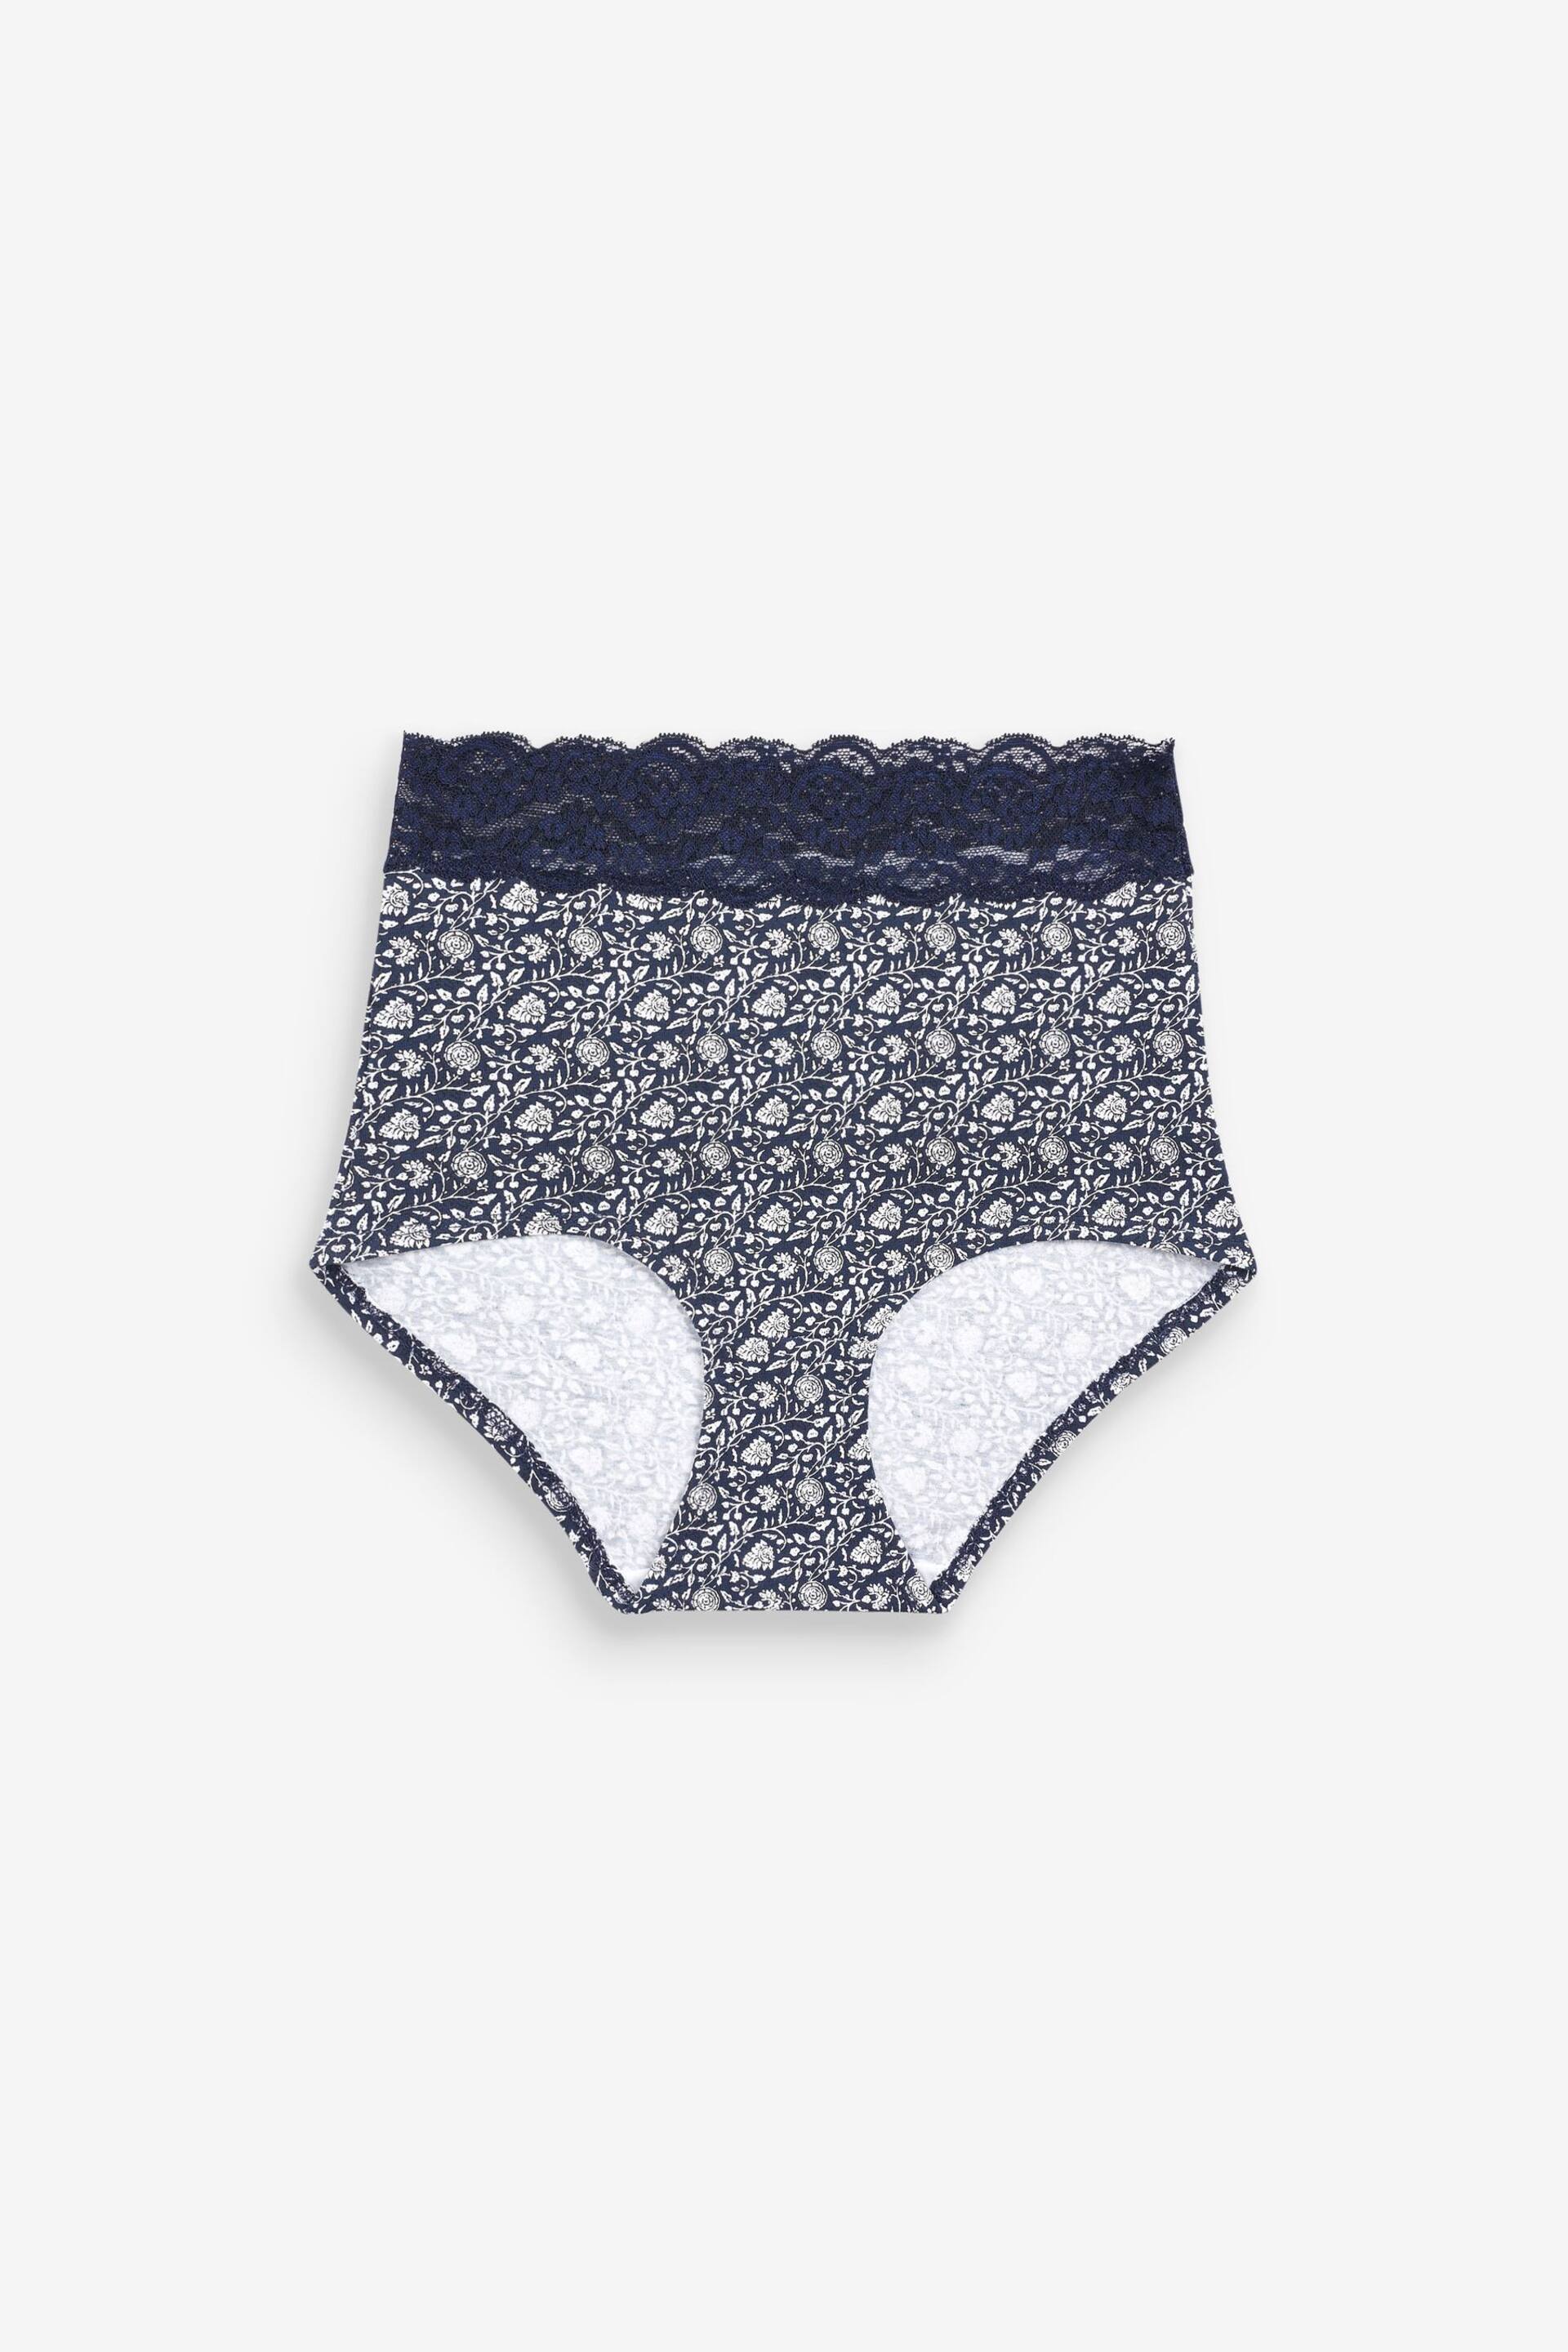 Navy/Cream Floral Print Full Brief Cotton and Lace Knickers 4 Pack - Image 6 of 8